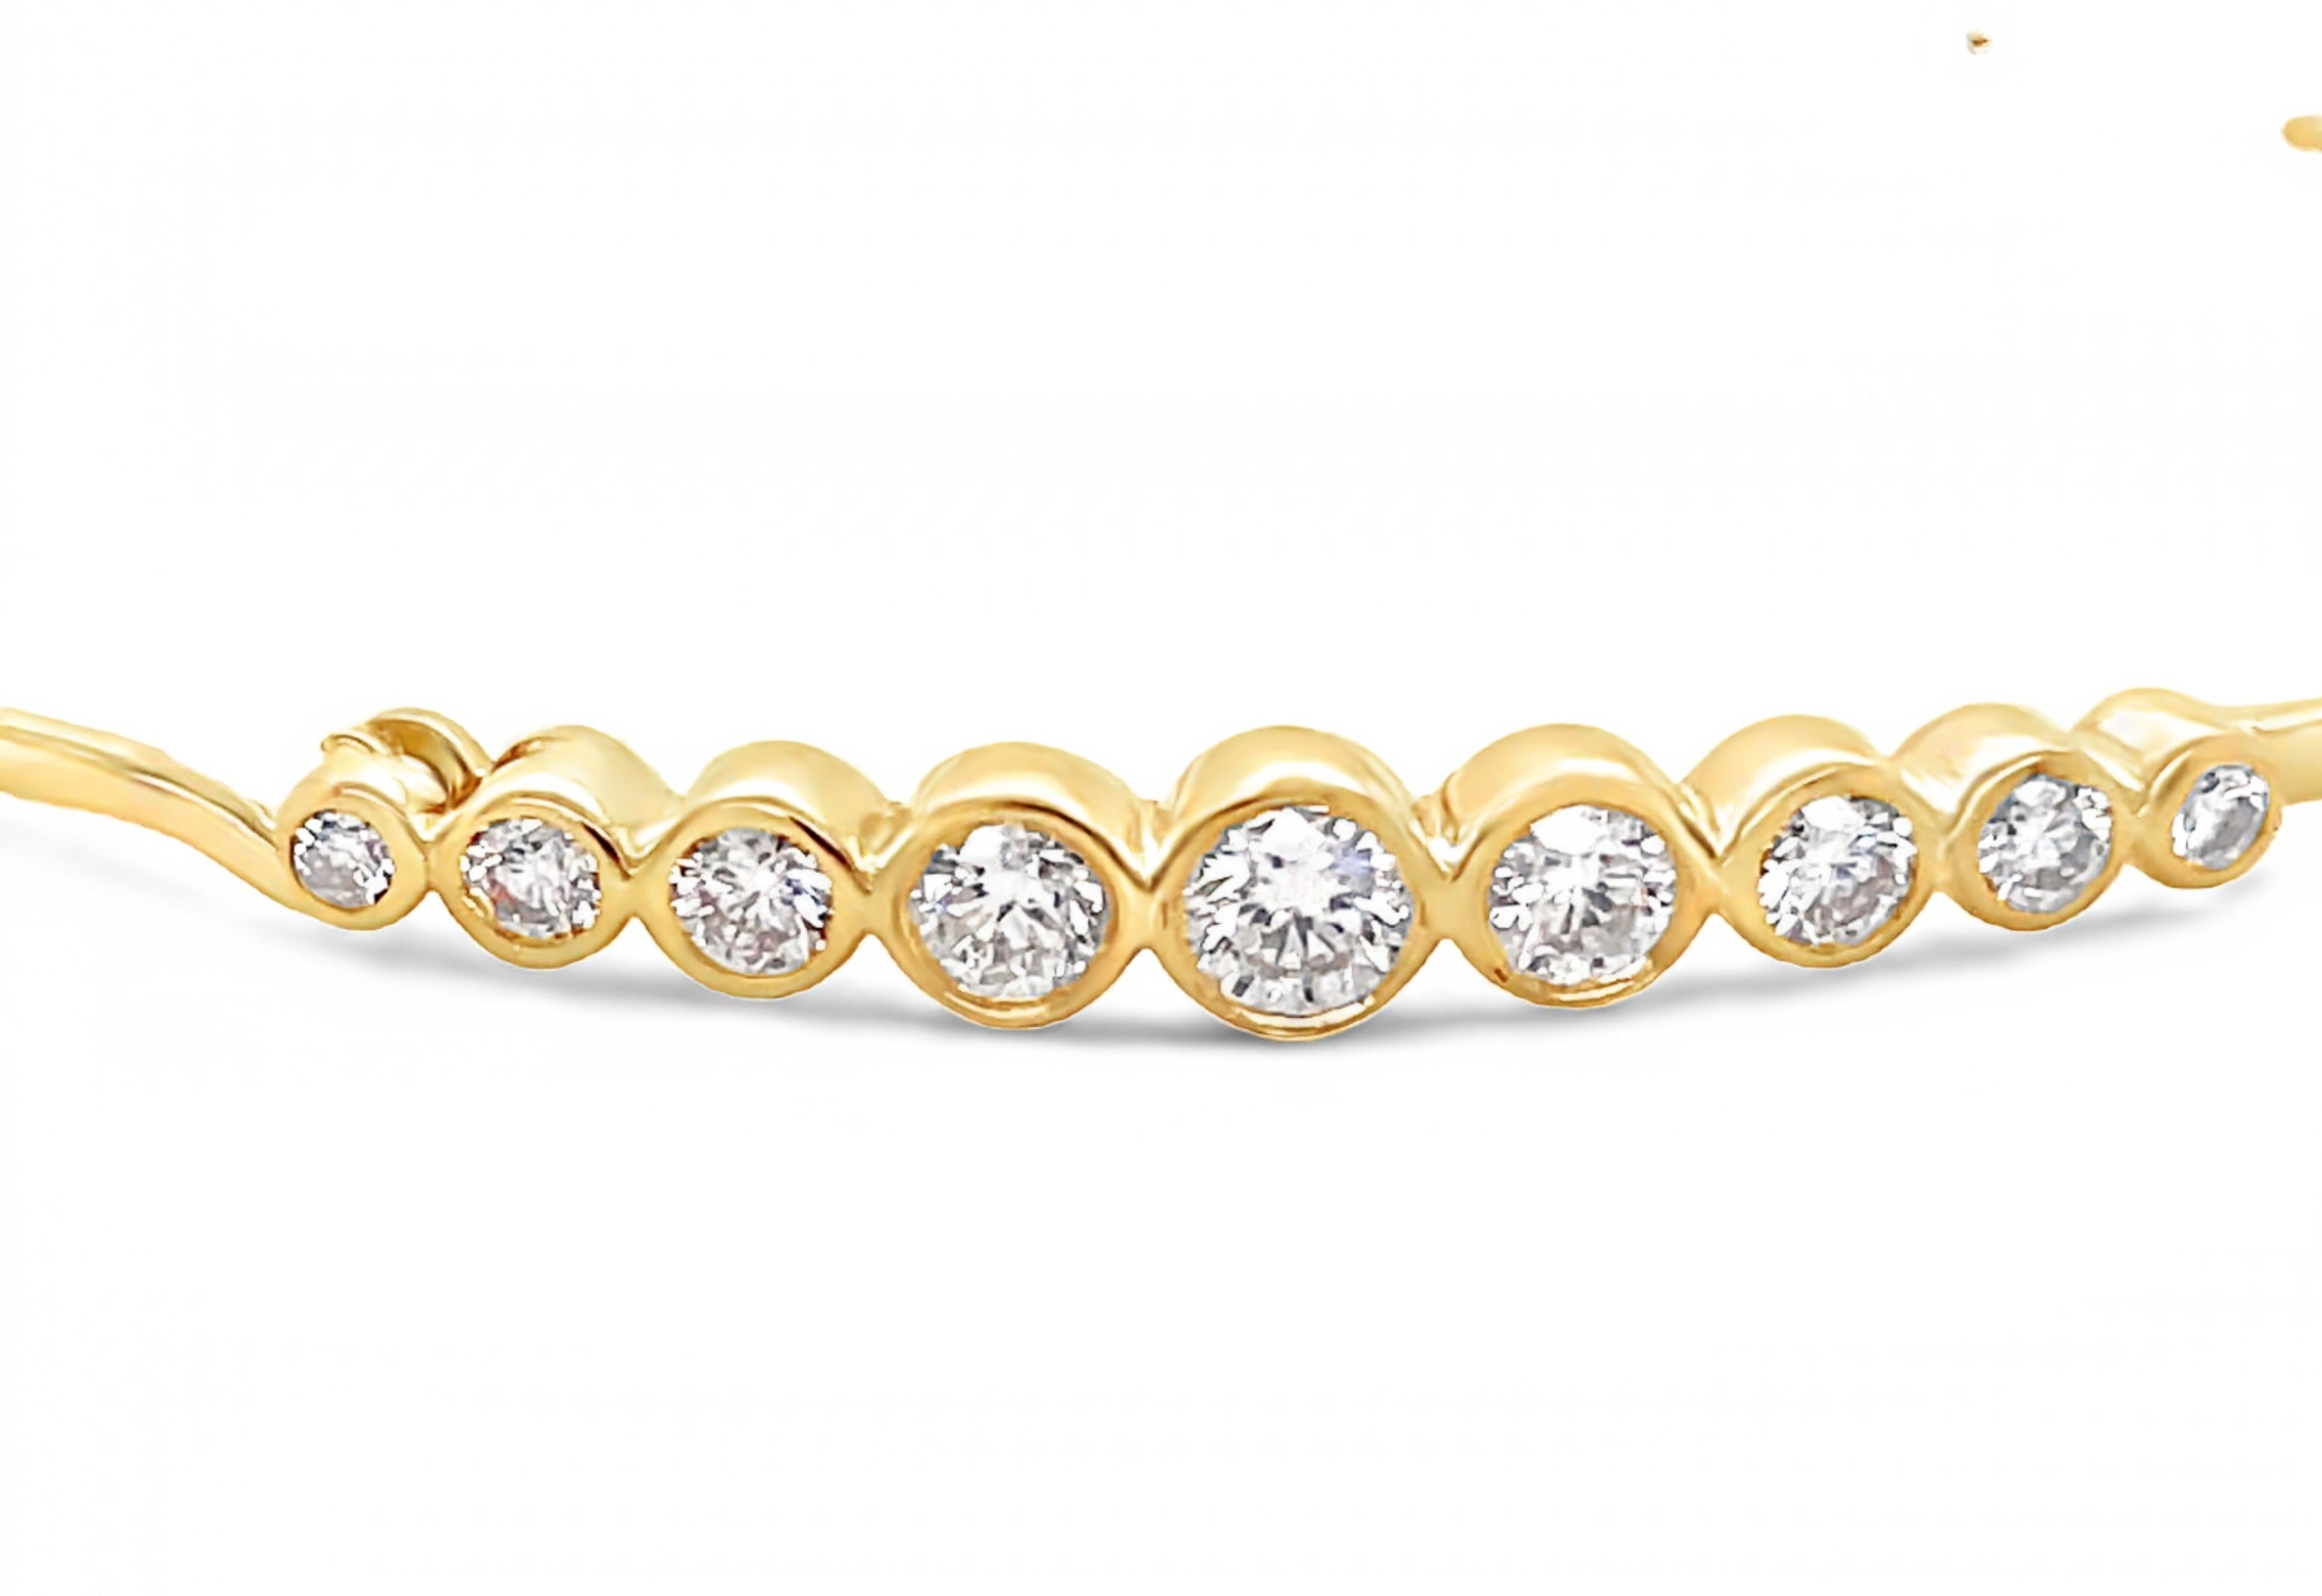 Dainty diamond bracelet 0.64 cts  9 round diamonds   14k Yellow Gold  Opens at fornt  You can stack it or wear it alone 